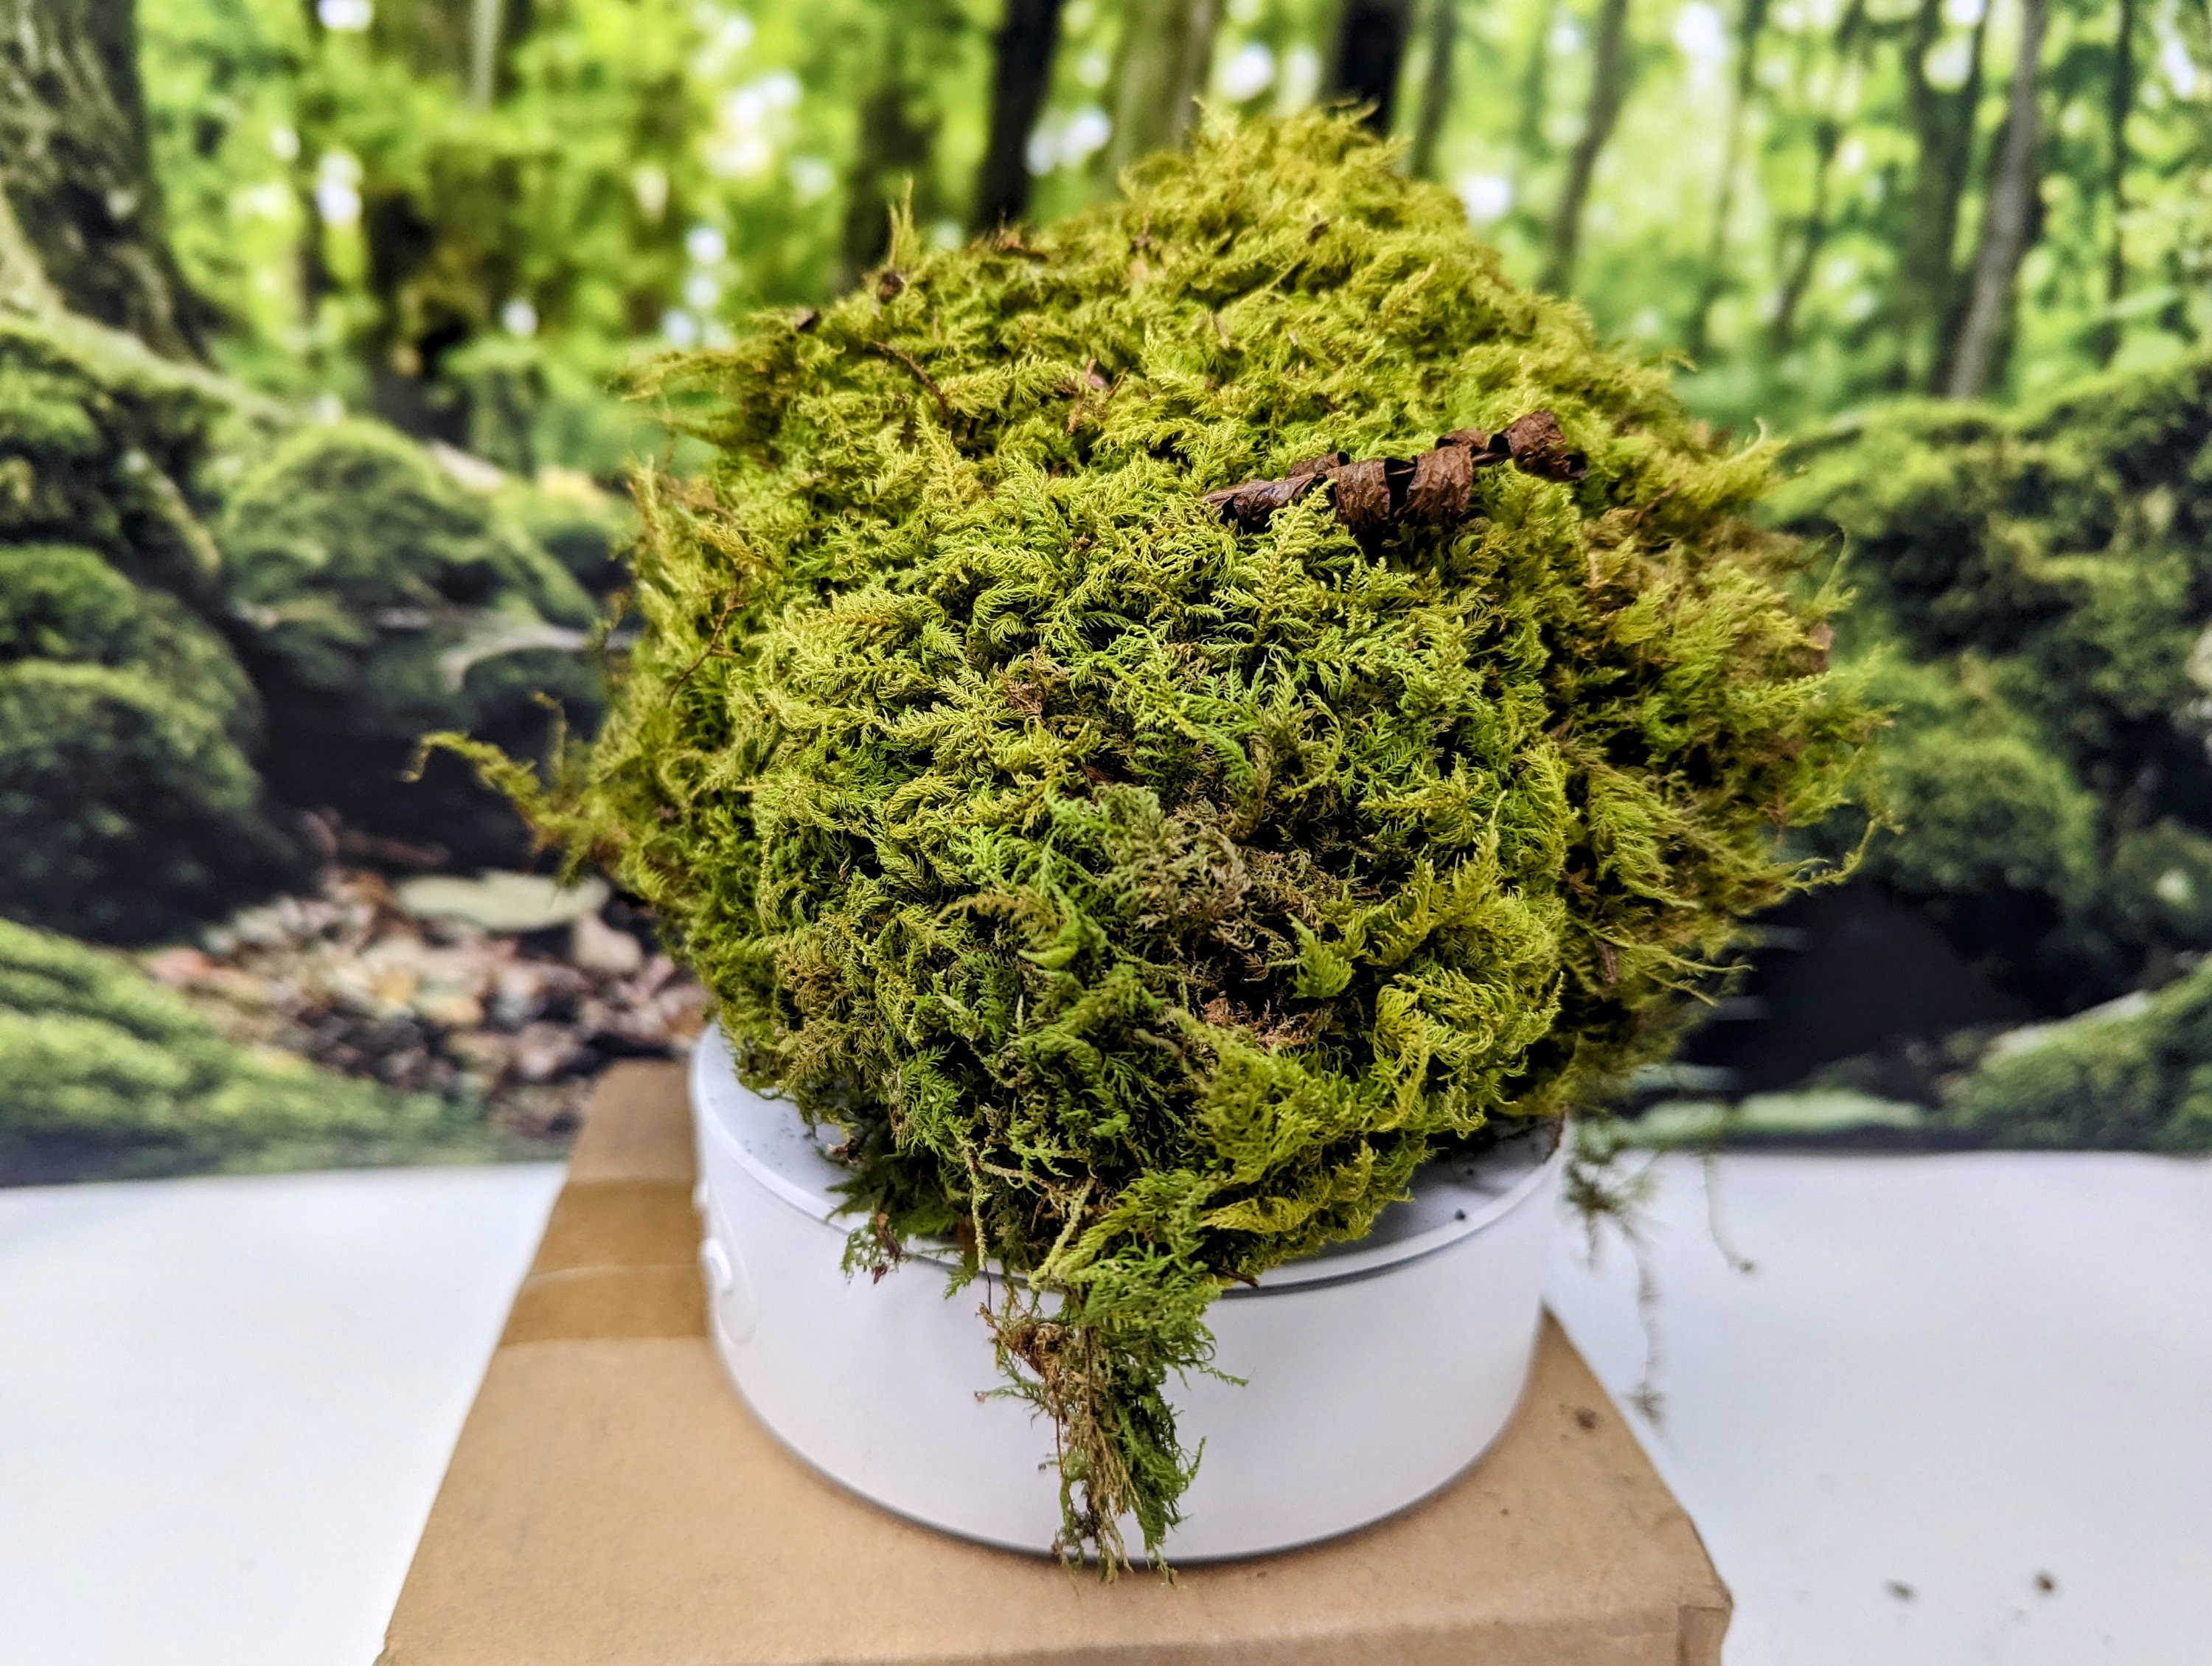 Live Moss Scraps for Transplant or Use Between Patio Stones Feather Sheet 1  Gallon Bag